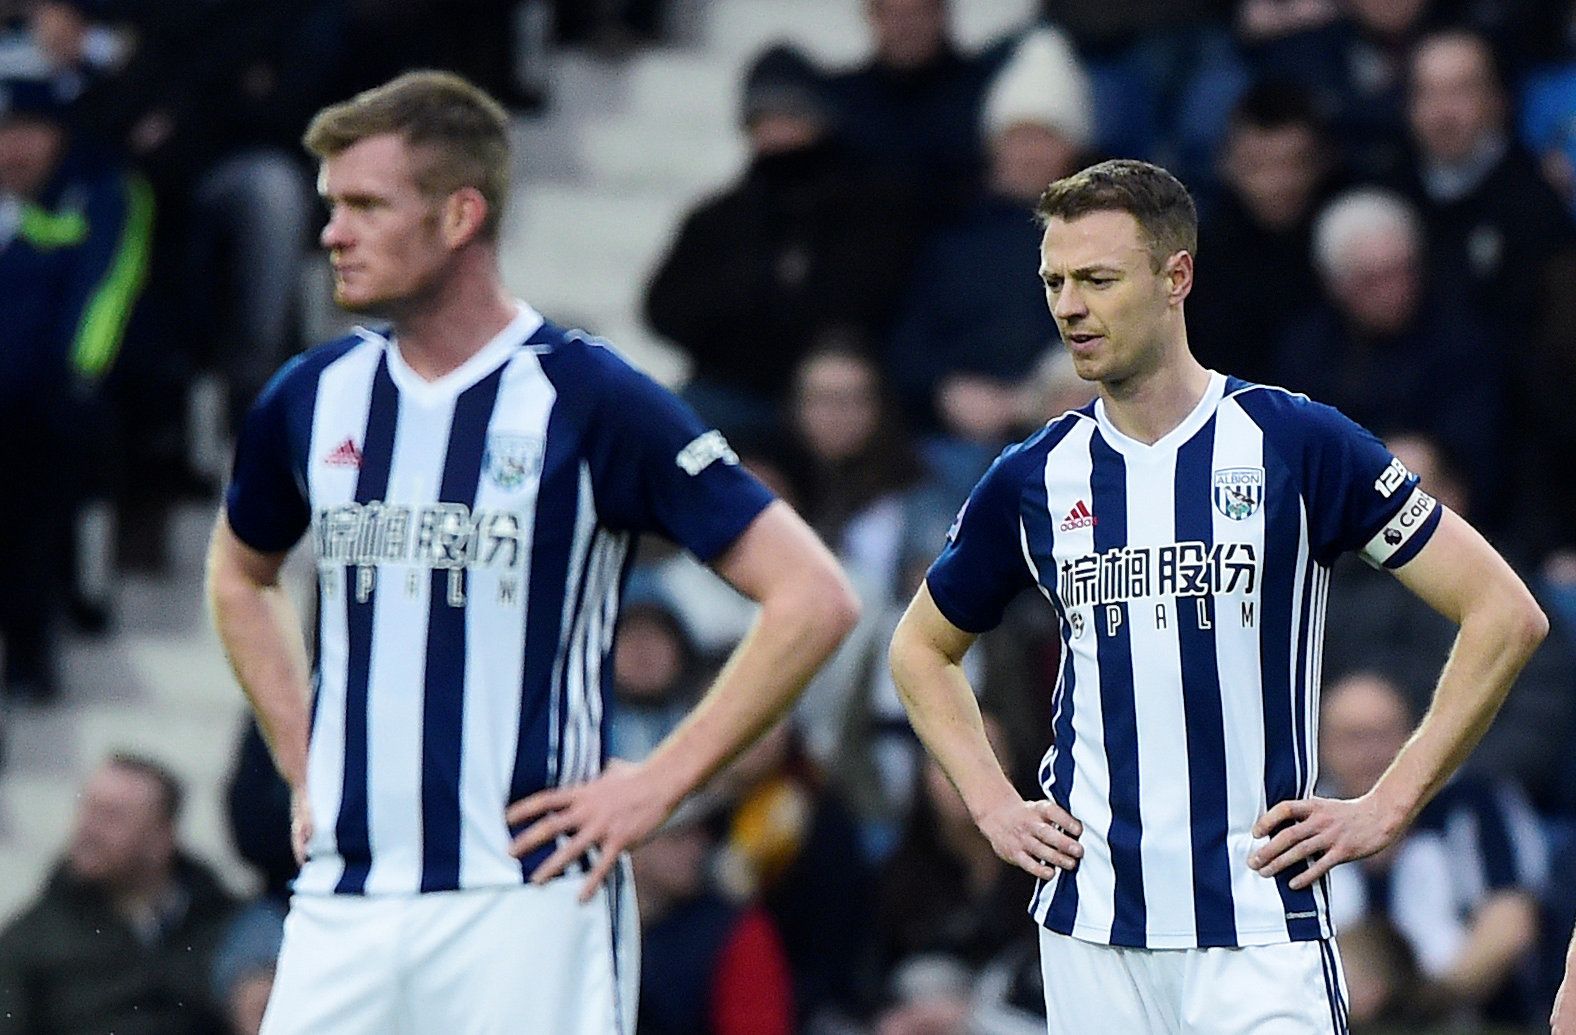 Soccer Football - Premier League - West Bromwich Albion vs Burnley - The Hawthorns, West Bromwich, Britain - March 31, 2018   West Bromwich Albion's Jonny Evans looks dejected after Burnley's Ashley Barnes (not pictured) scored their first goal     REUTERS/Rebecca Naden    EDITORIAL USE ONLY. No use with unauthorized audio, video, data, fixture lists, club/league logos or 